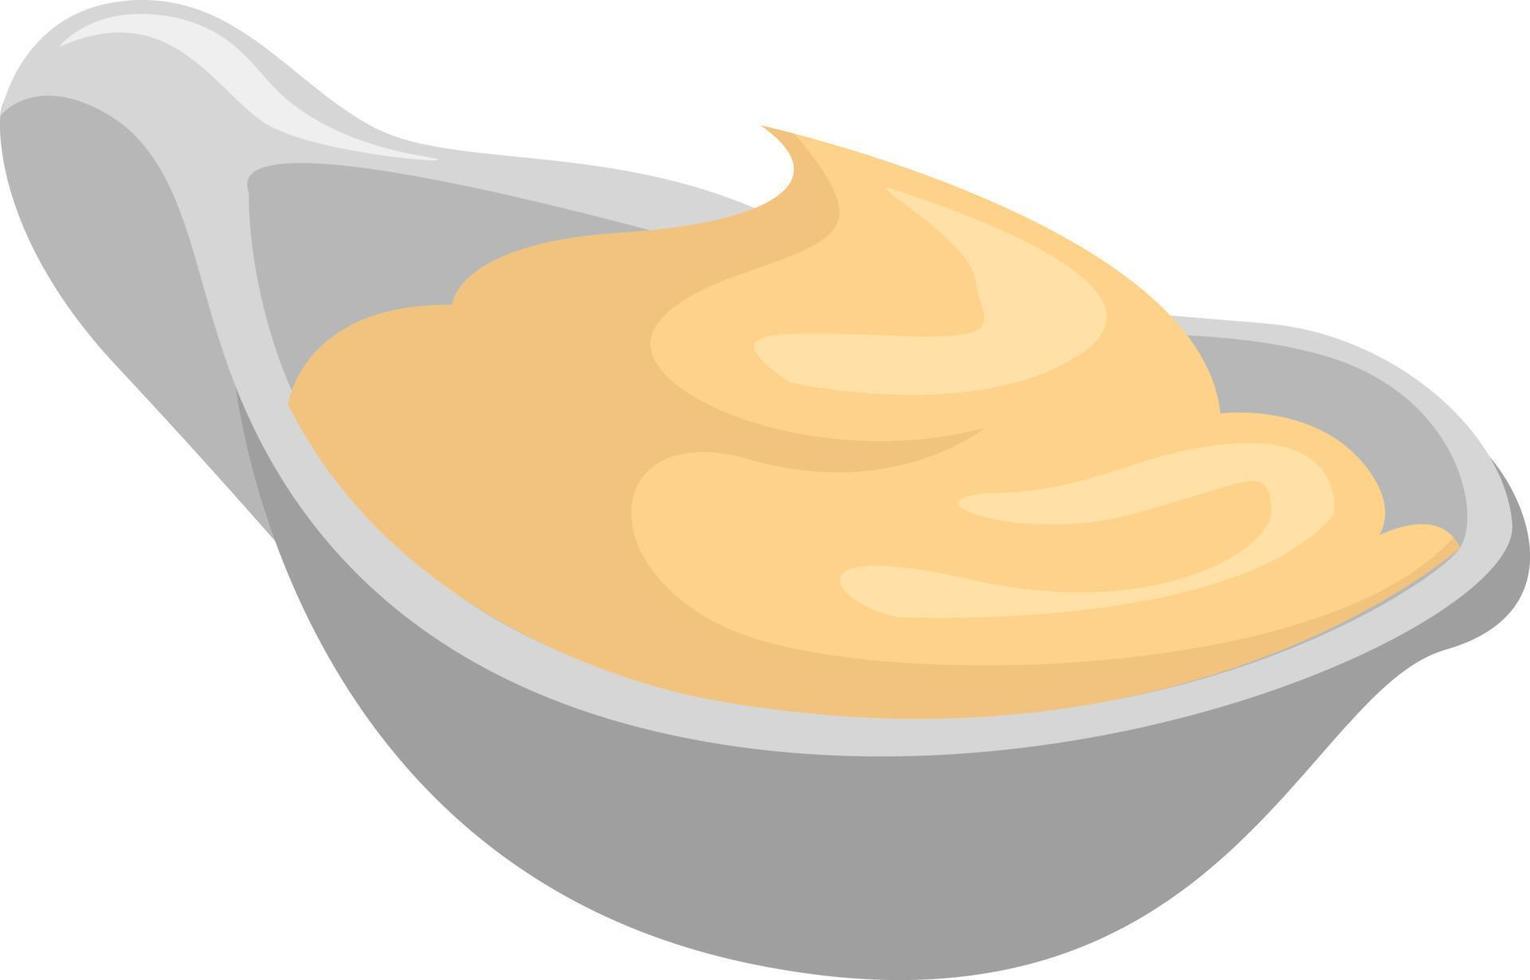 Mayonnaise in a bowl, illustration, vector on white background.